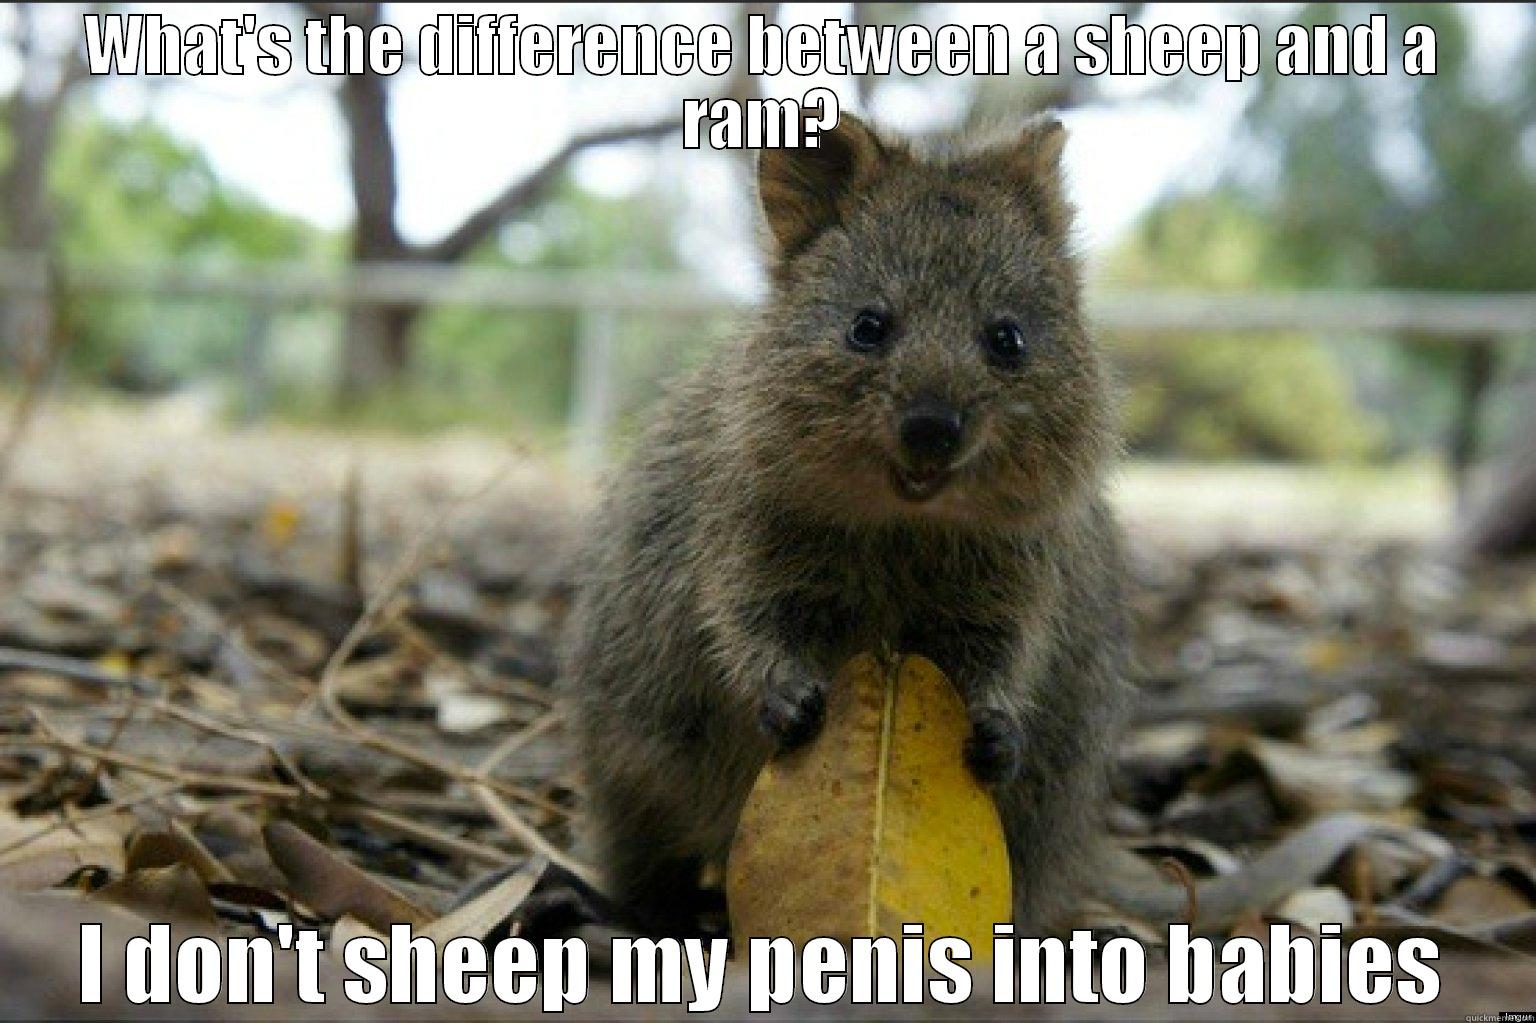 Offenisve Quokka 2 - WHAT'S THE DIFFERENCE BETWEEN A SHEEP AND A RAM? I DON'T SHEEP MY PENIS INTO BABIES Misc